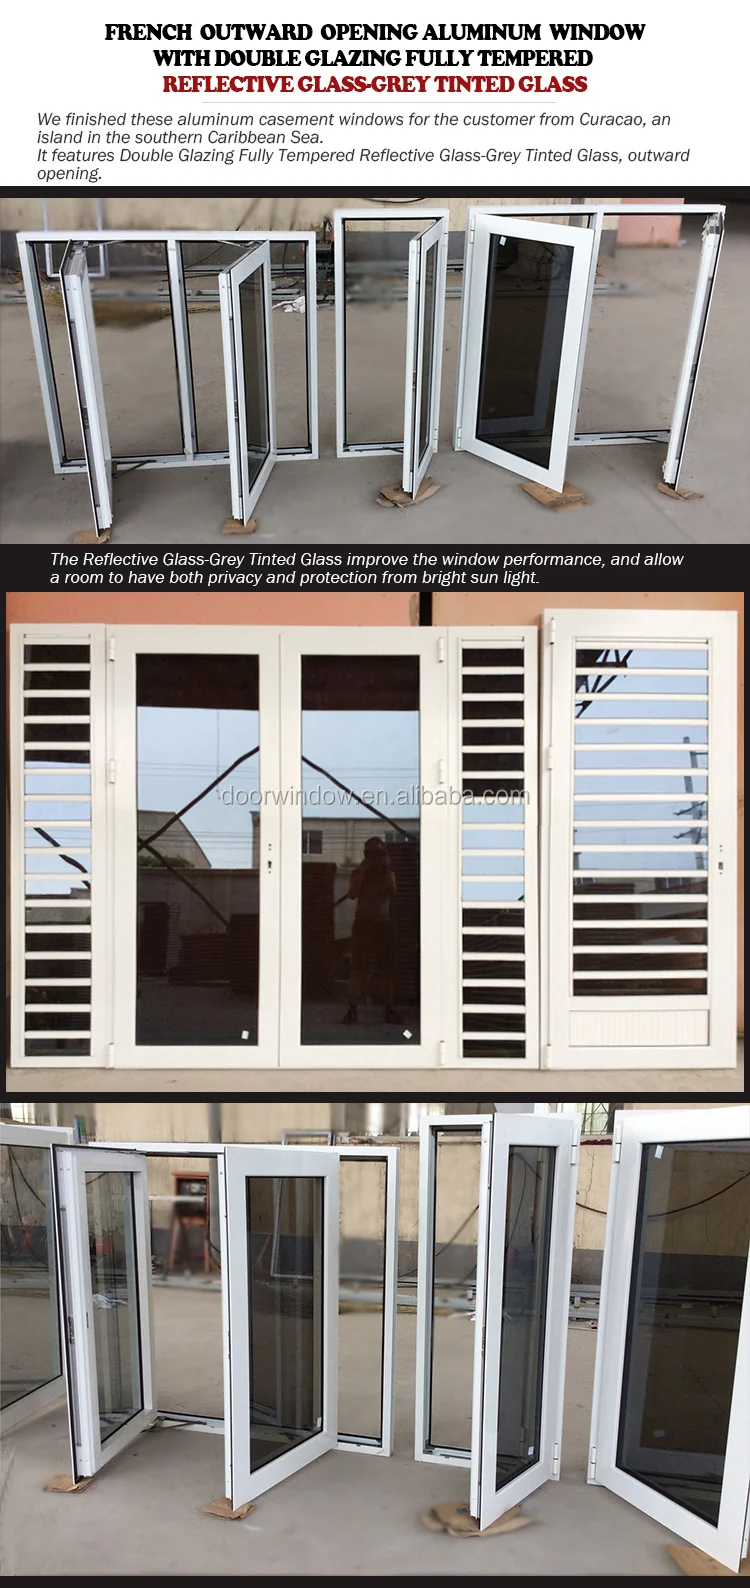 Customized Double Glazing Fully Tempered Reflective Glass Grey Tinted Outswing Aluminum Casement Window